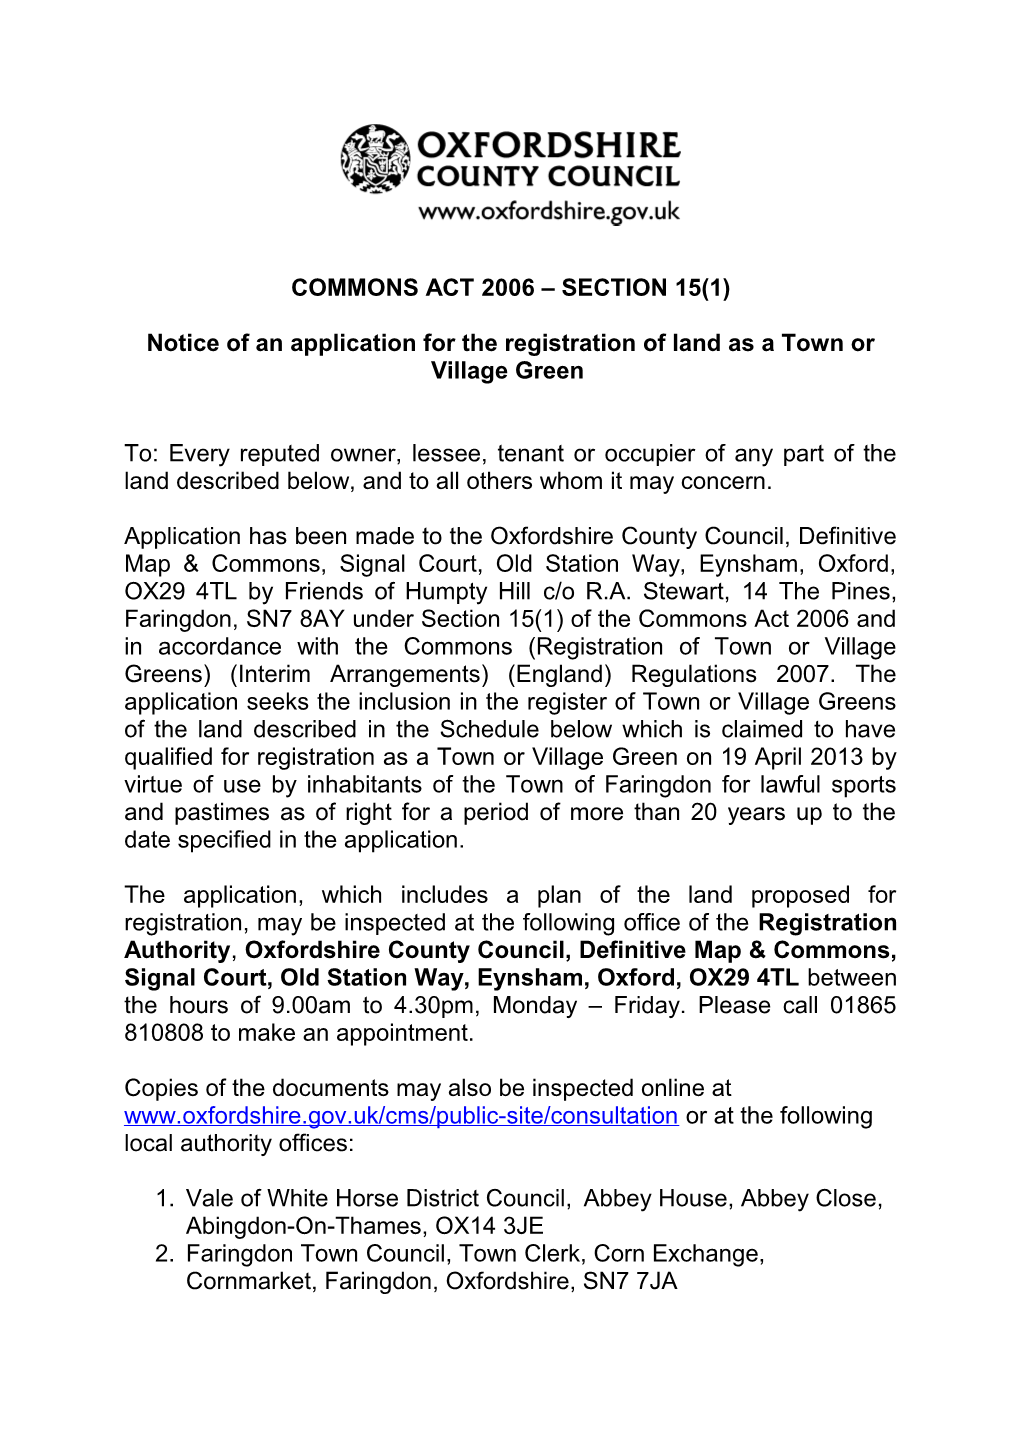 Notice of an Application for the Registration of Land As a Town Or Village Green